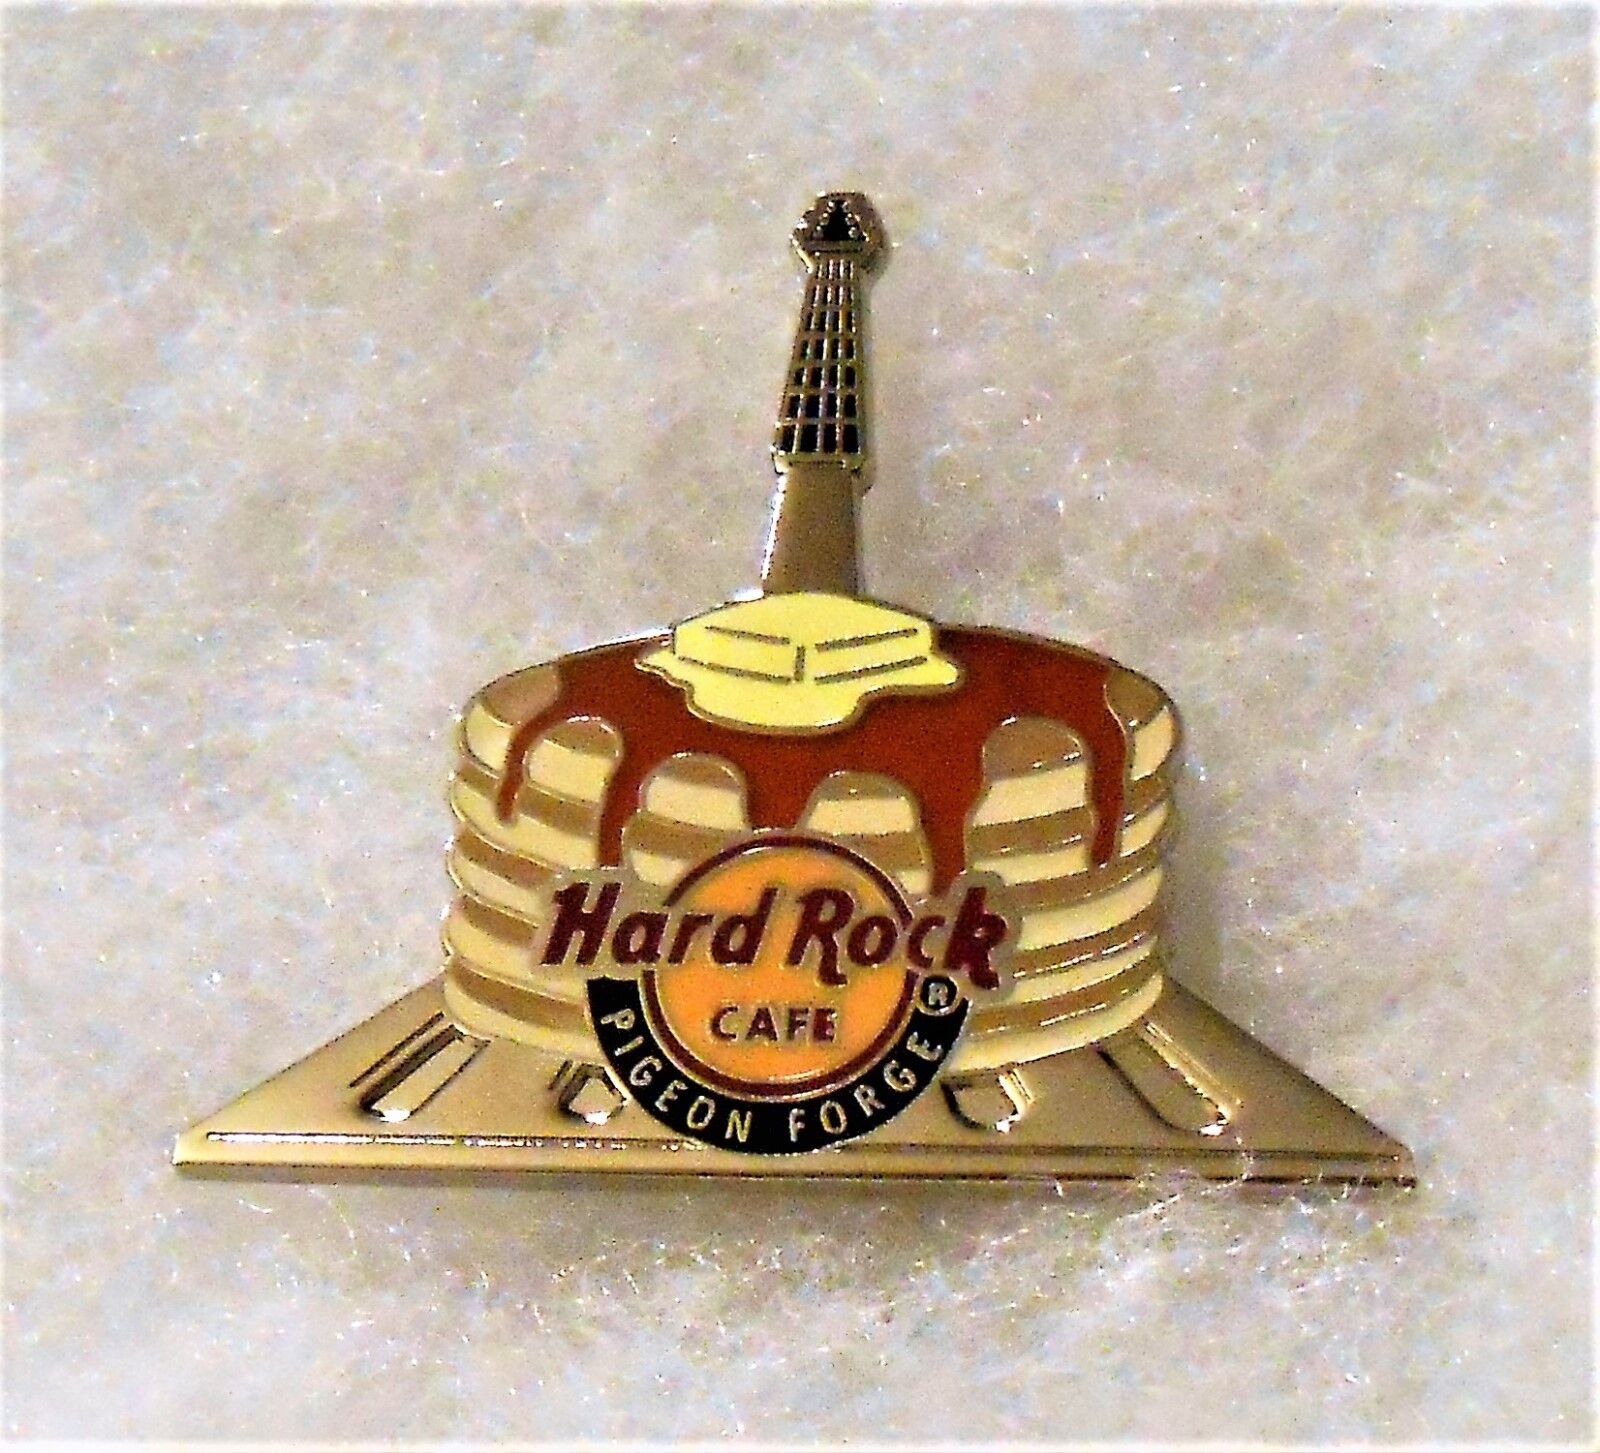 HARD ROCK CAFE PIGEON FORGE PANCAKES BUTTER SYRUP SPATULA GUITAR PIN # 84792